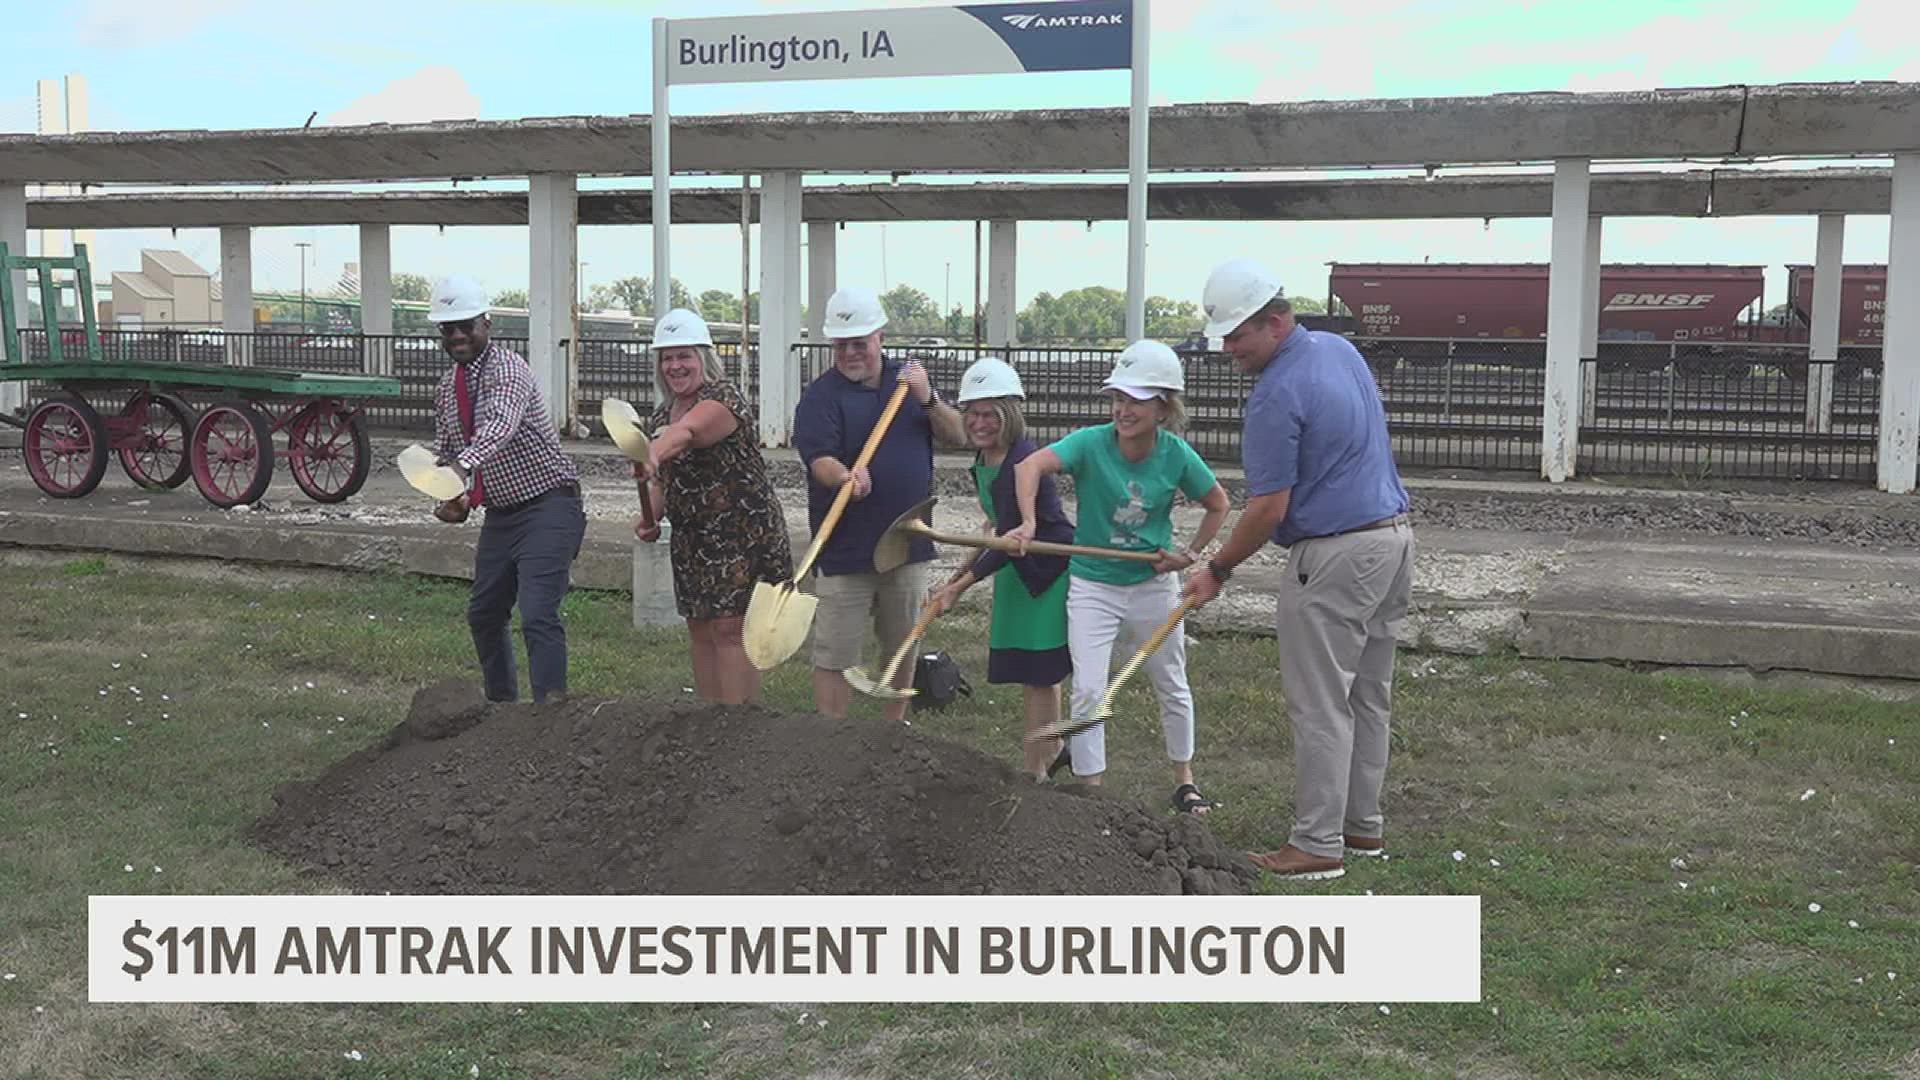 The $11.5 million investment will go towards two new boarding platforms, new station signage and guardrails for the train station.